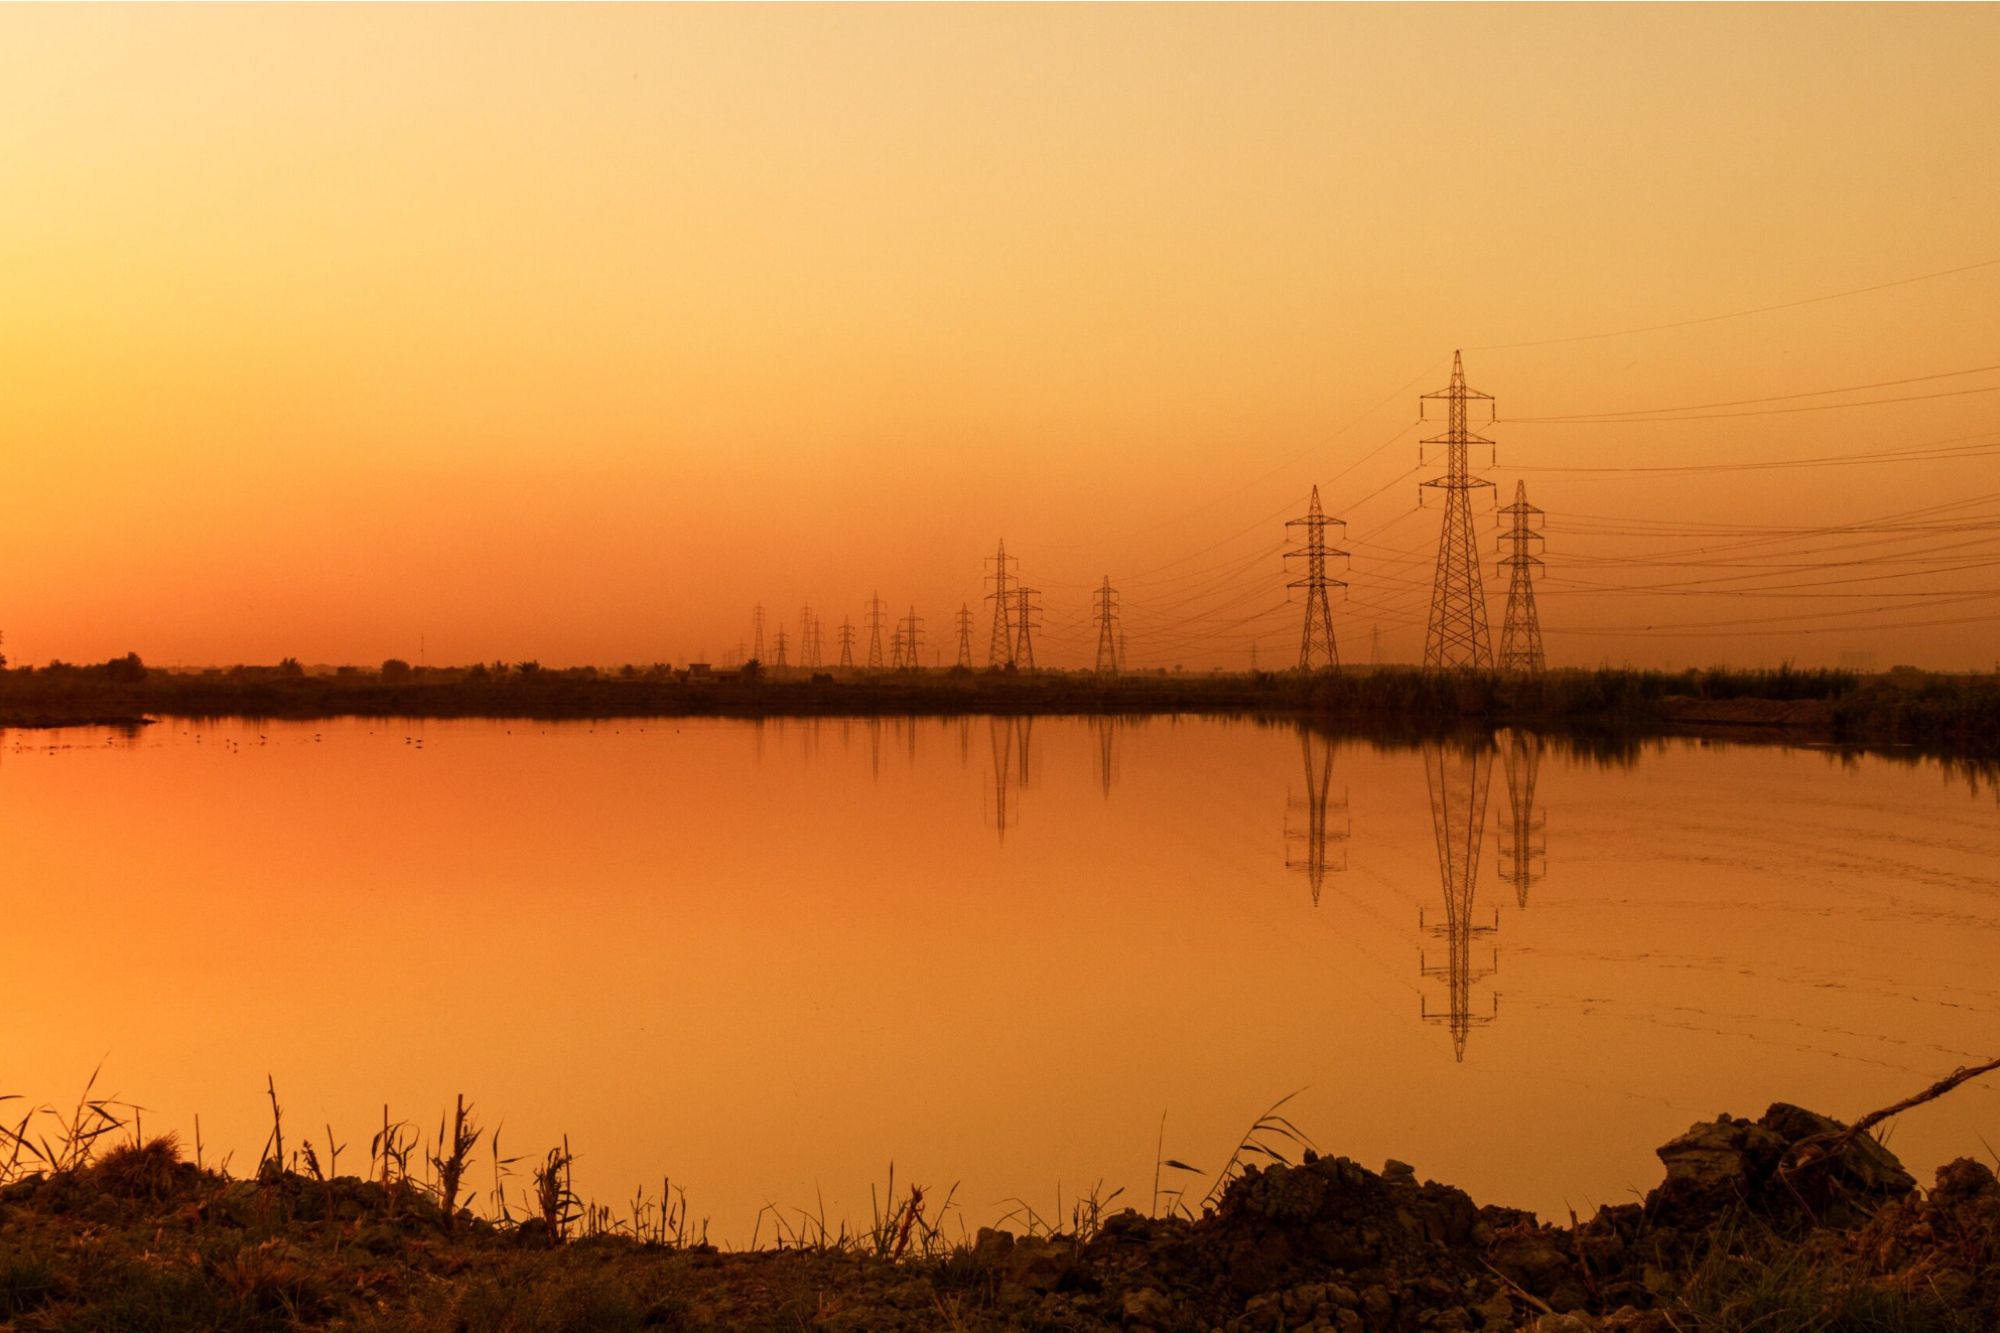 Sterlite Power achieves financial closure for Beawar transmission project